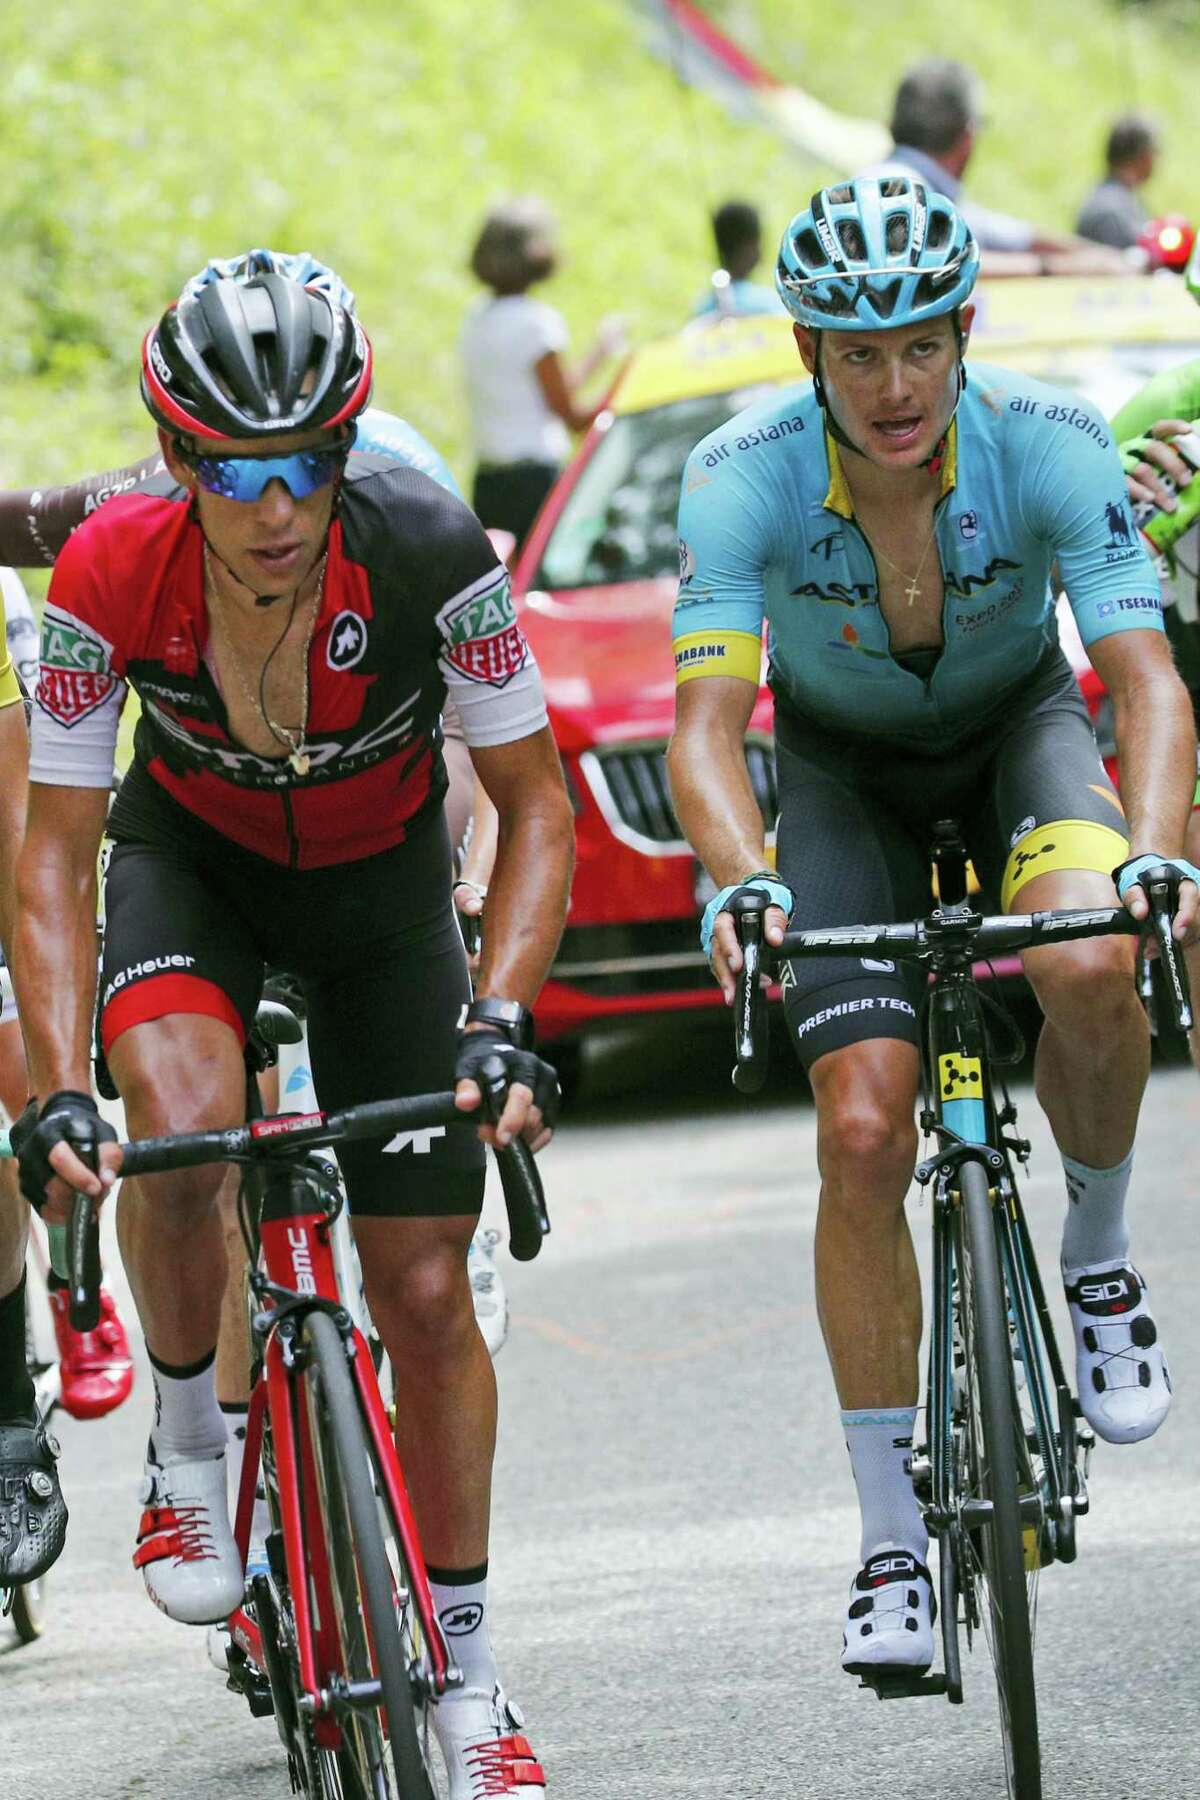 Australia’s Richie Porte, left, and Denmark’s Jakob Fuglsang, climb Mont du Chat pass during the ninth stage of the Tour de France cycling race over 181.5 kilometers (112.8 miles) with start in Nantua and finish in Chambery, France on July 9, 2017.